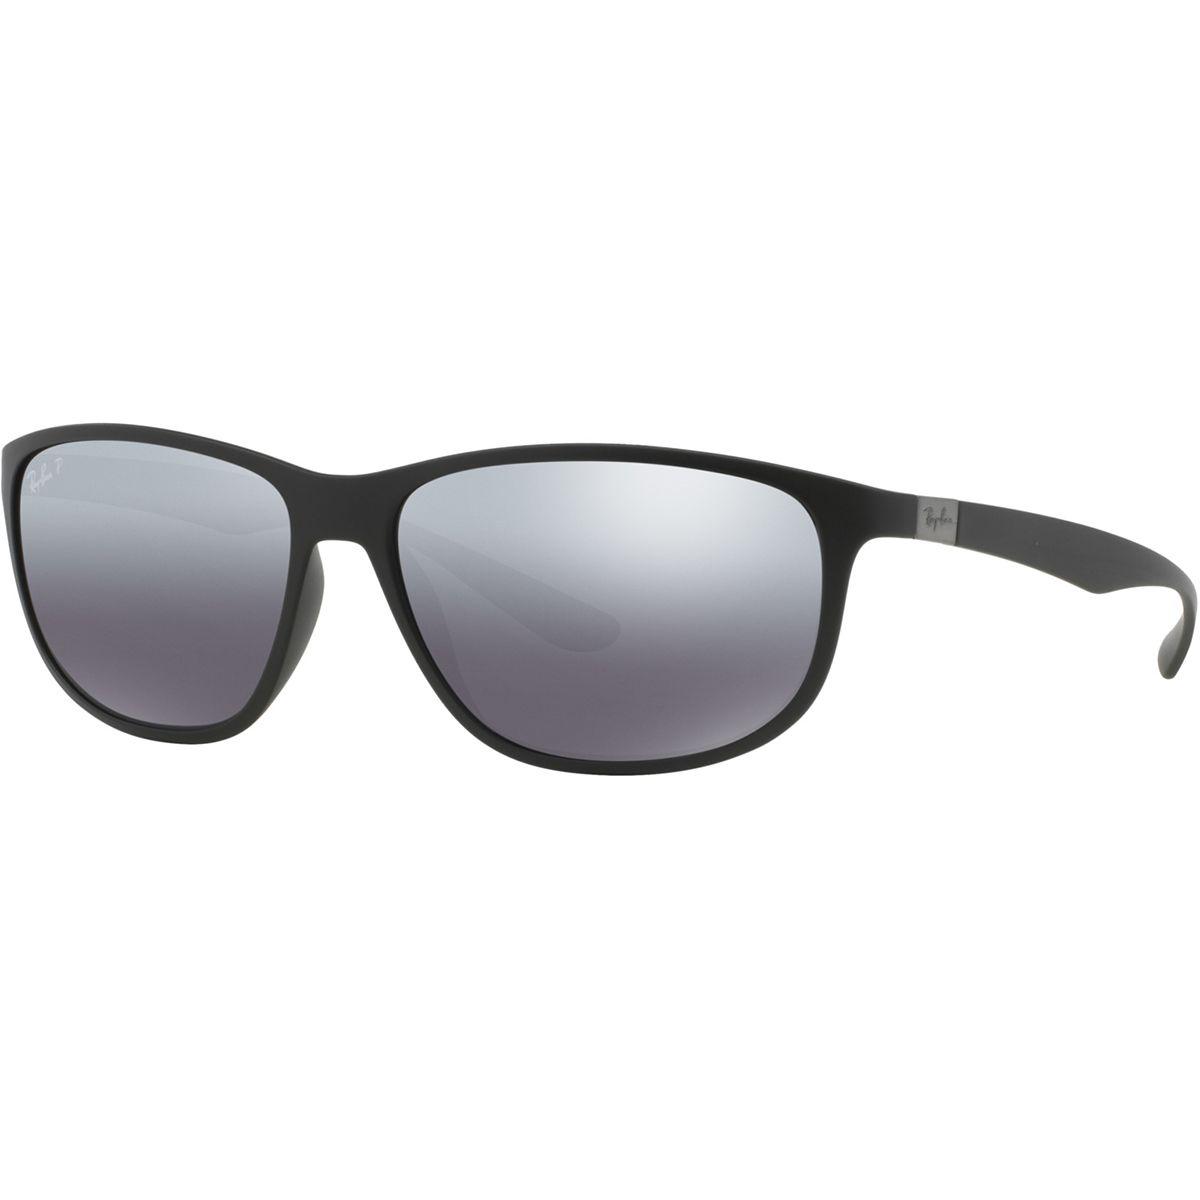 Ray-Ban Rb4213 Polarized Sunglasses in 